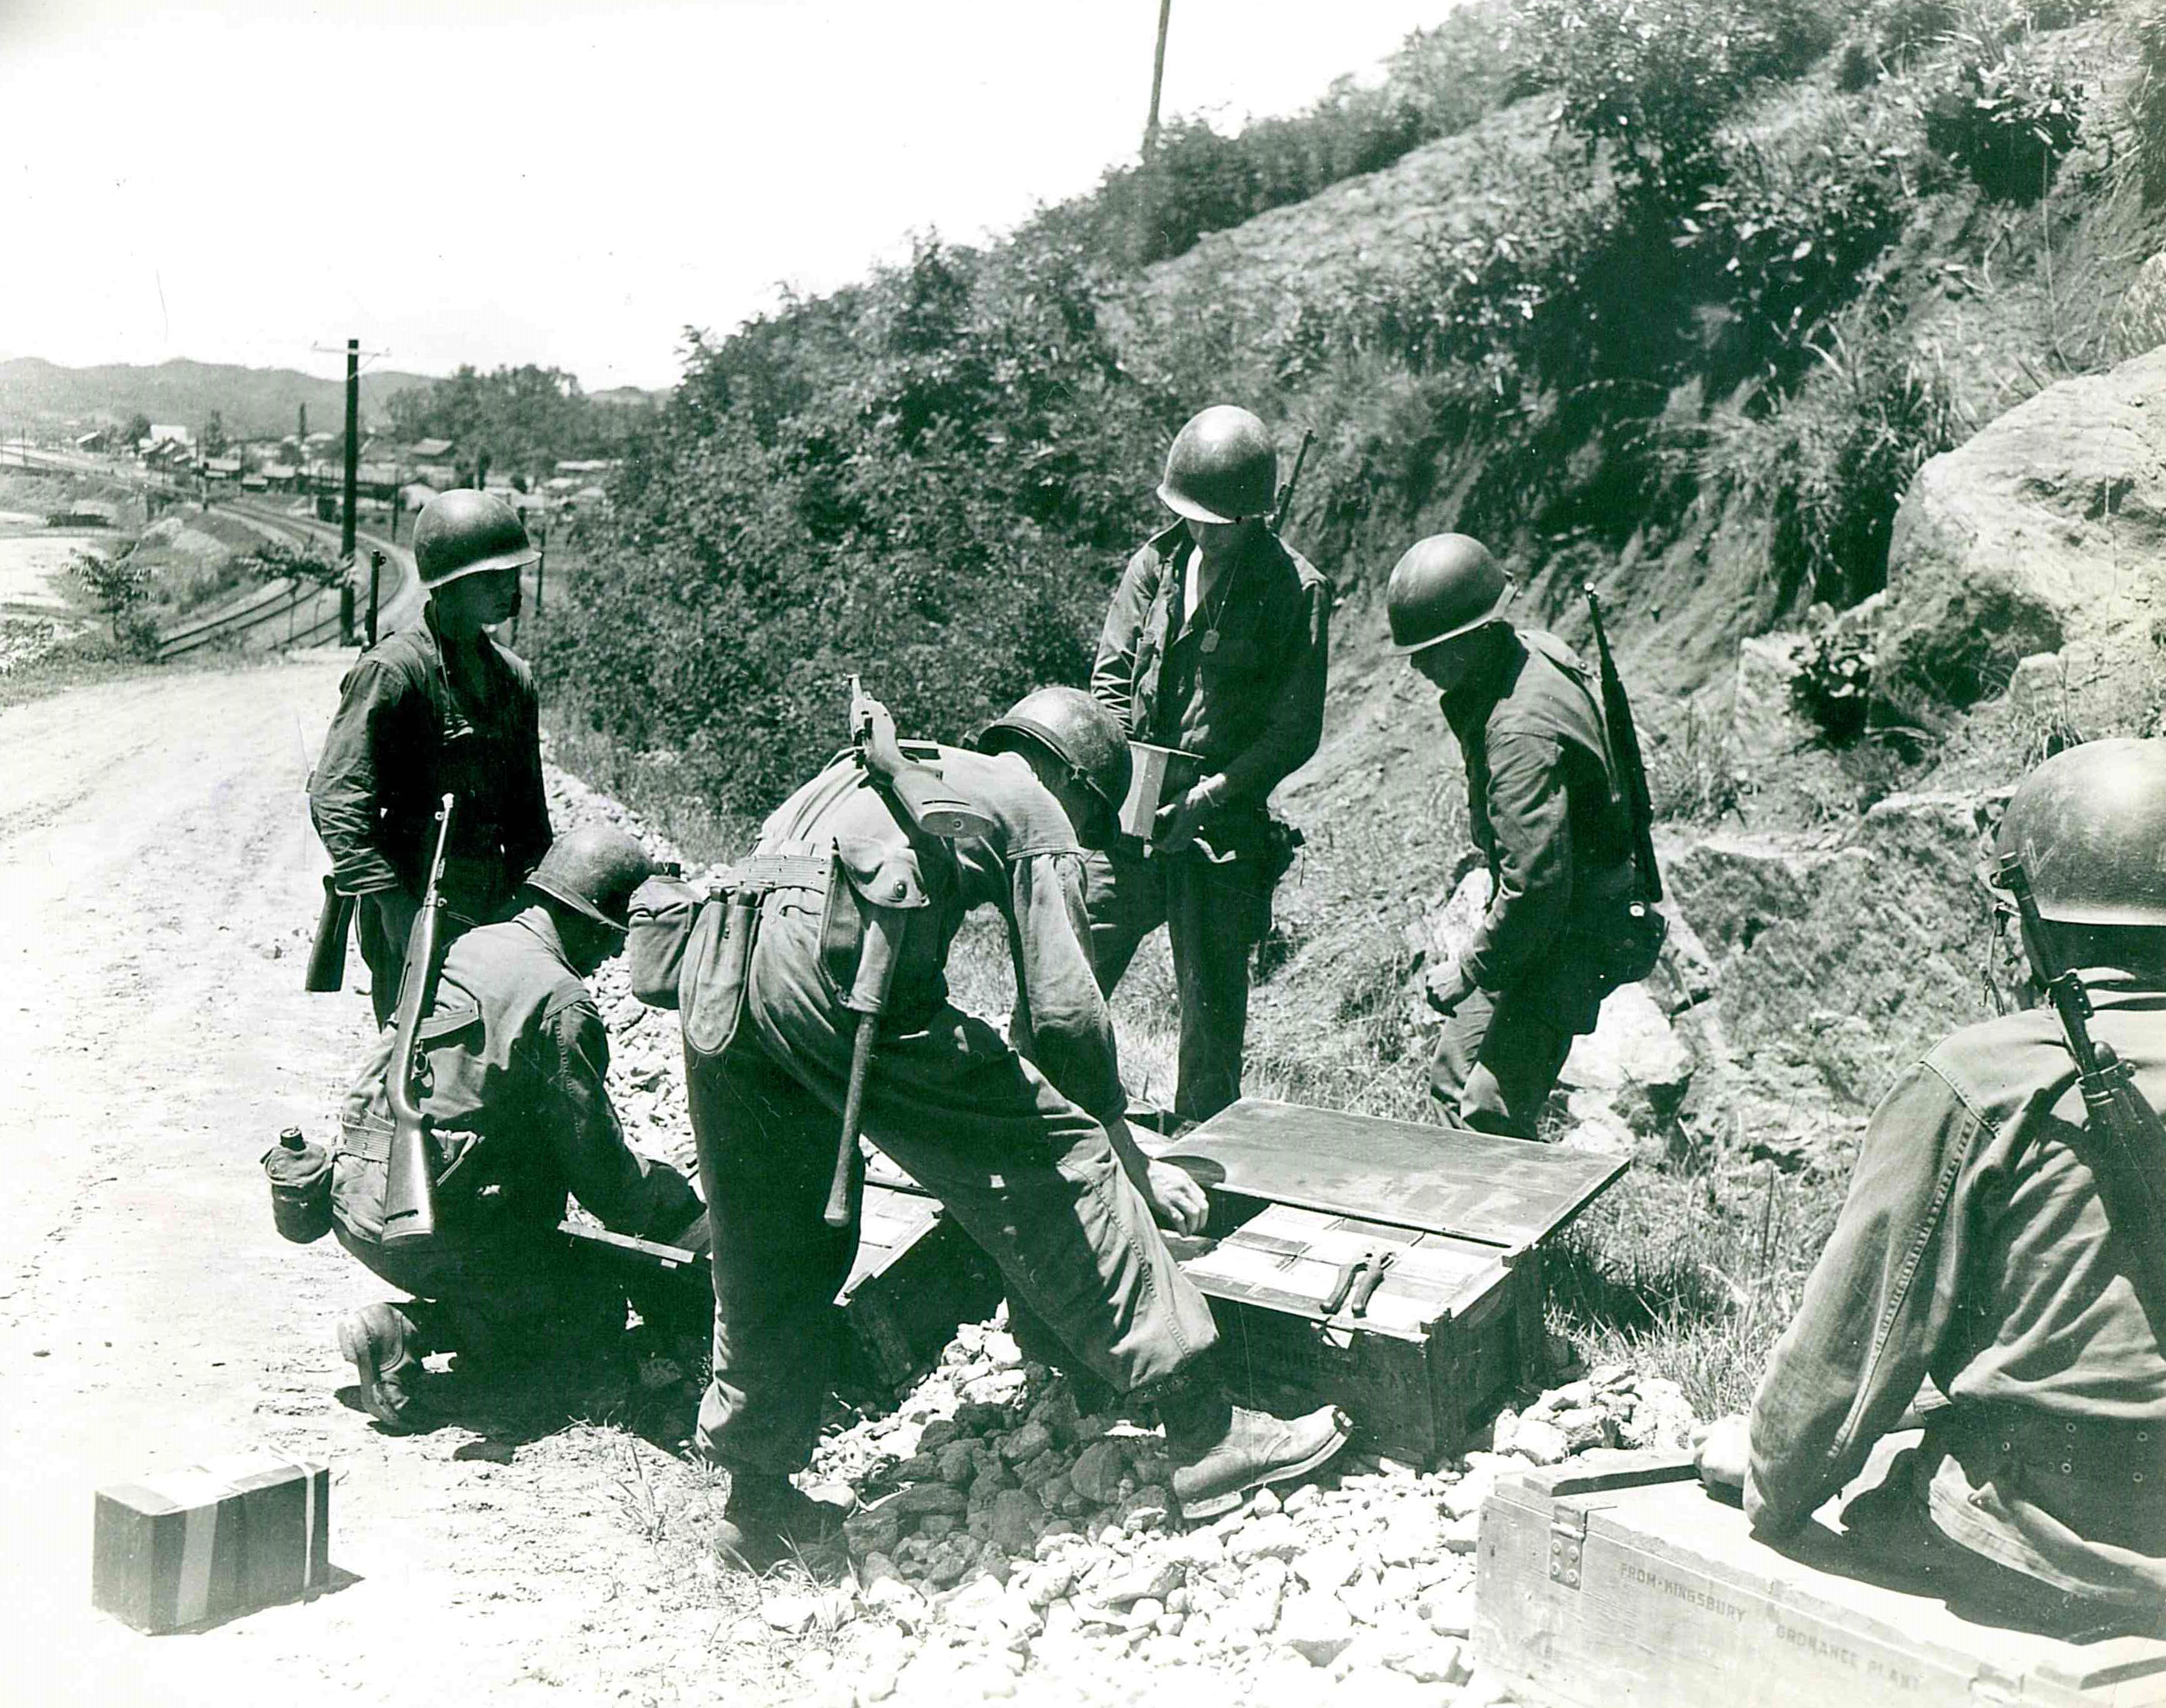 US Soldiers in Korea, United States Archives image